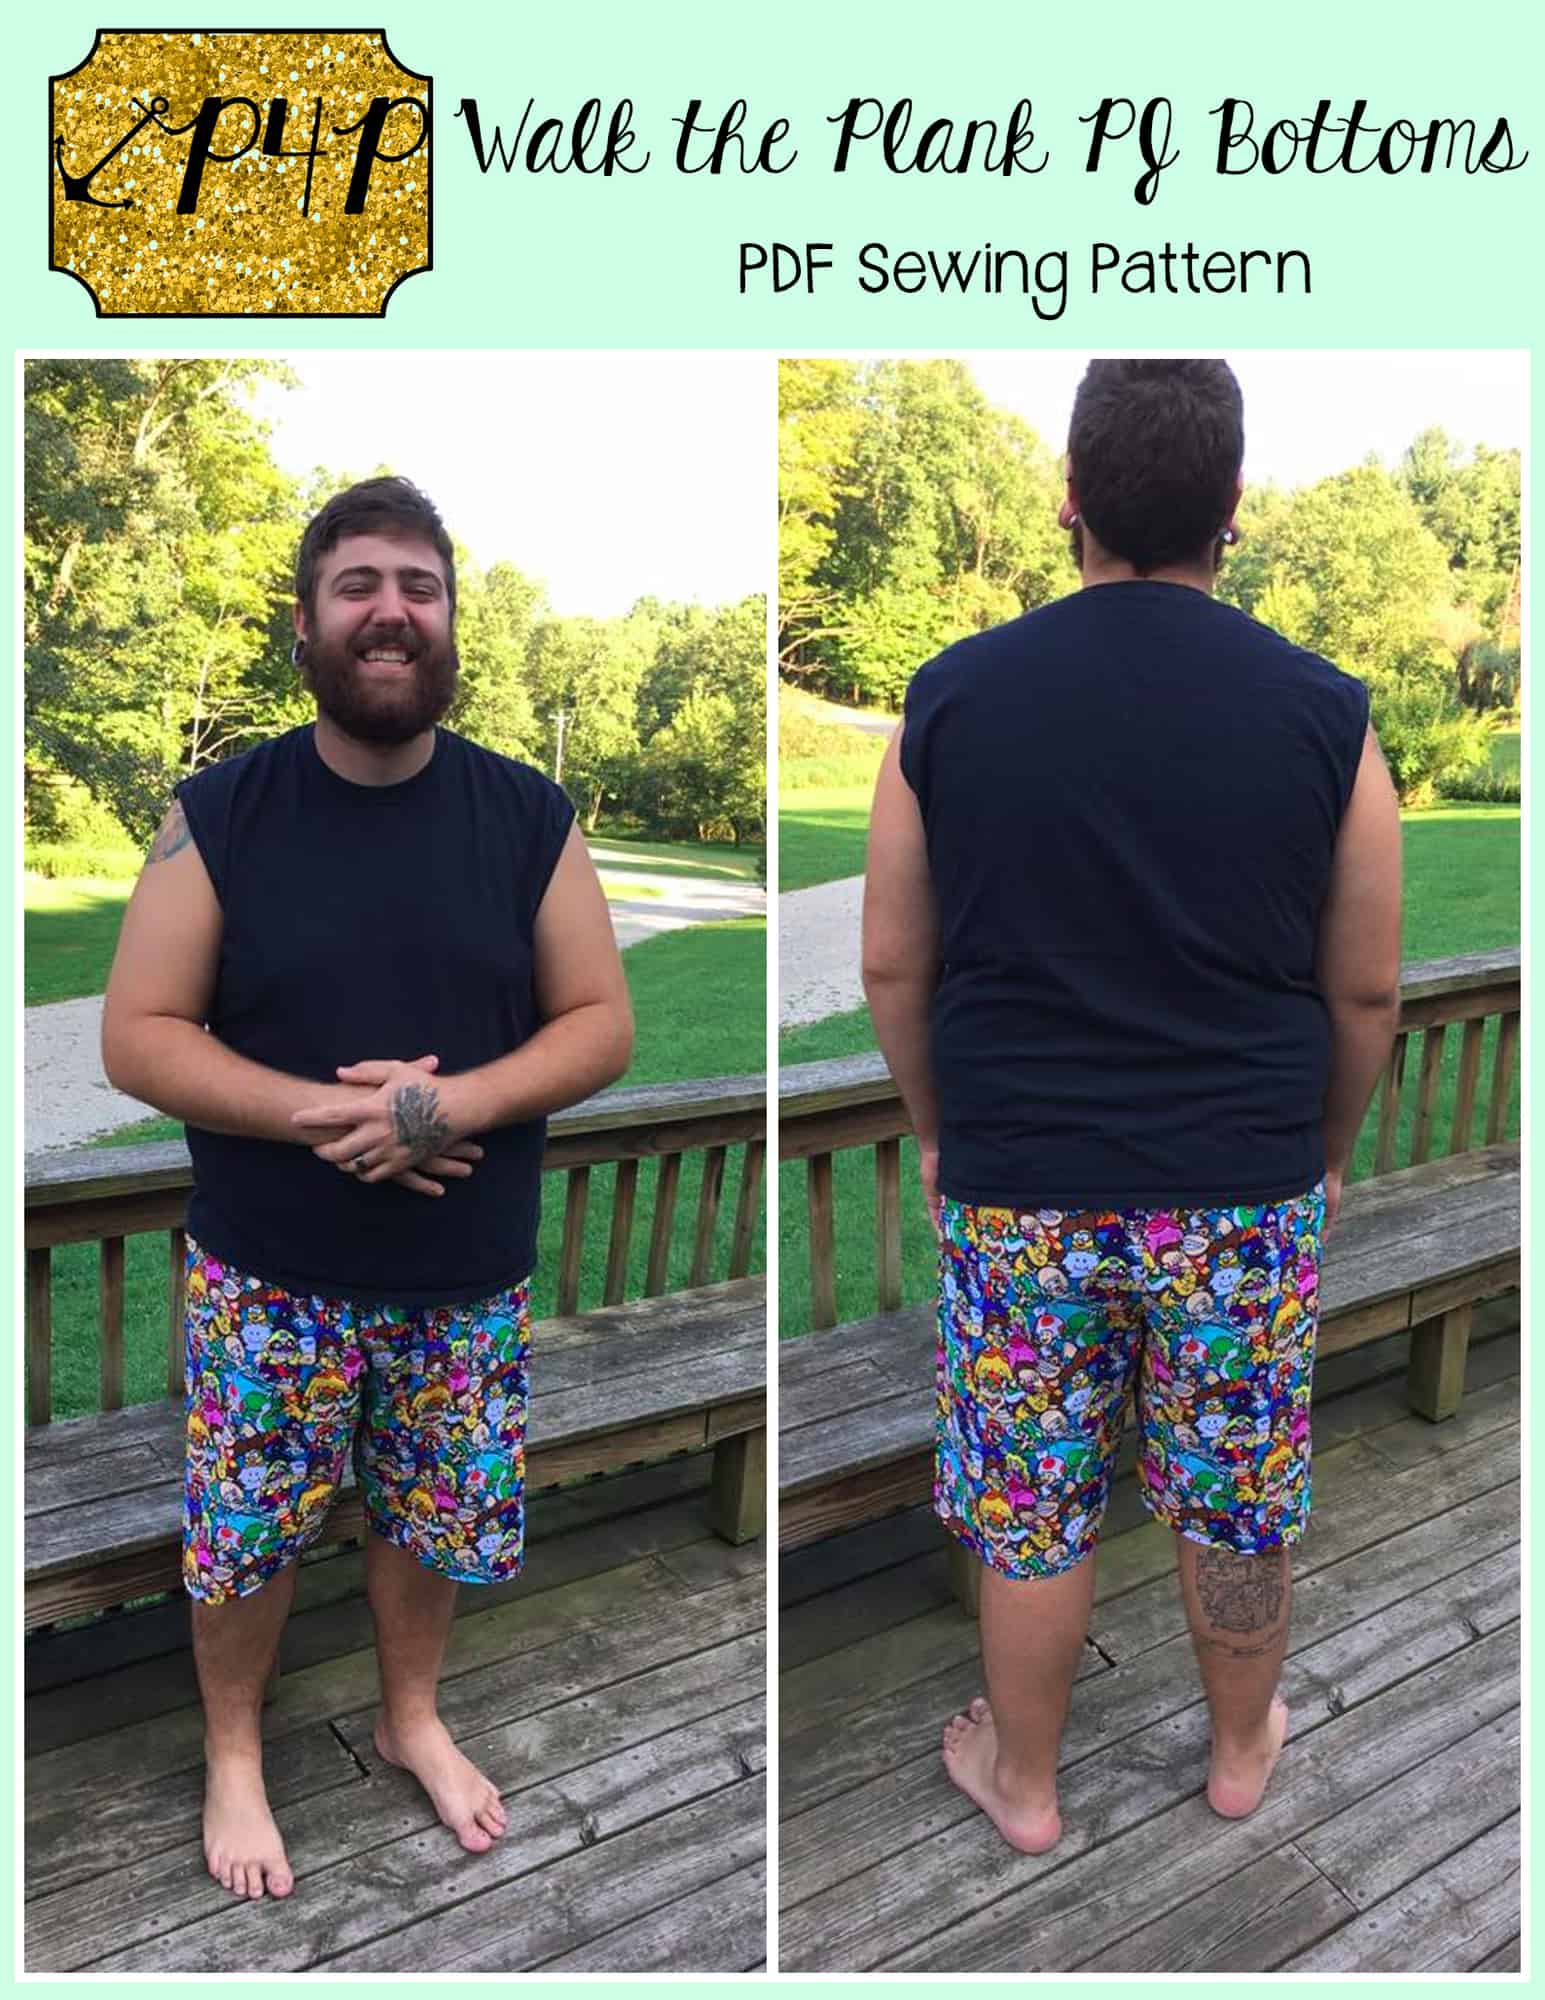 Peek-a-Boo Pattern Shop - Time to explore our pajama pants sewing patterns!  Perfect for sewing cozy sleepwear tailored to your style. Let's sew some  dreamy pajamas! 😴🧵 #ThrowbackTutorial #DIYPajamaPants #HandmadeSleepwear  #SewingClassics https